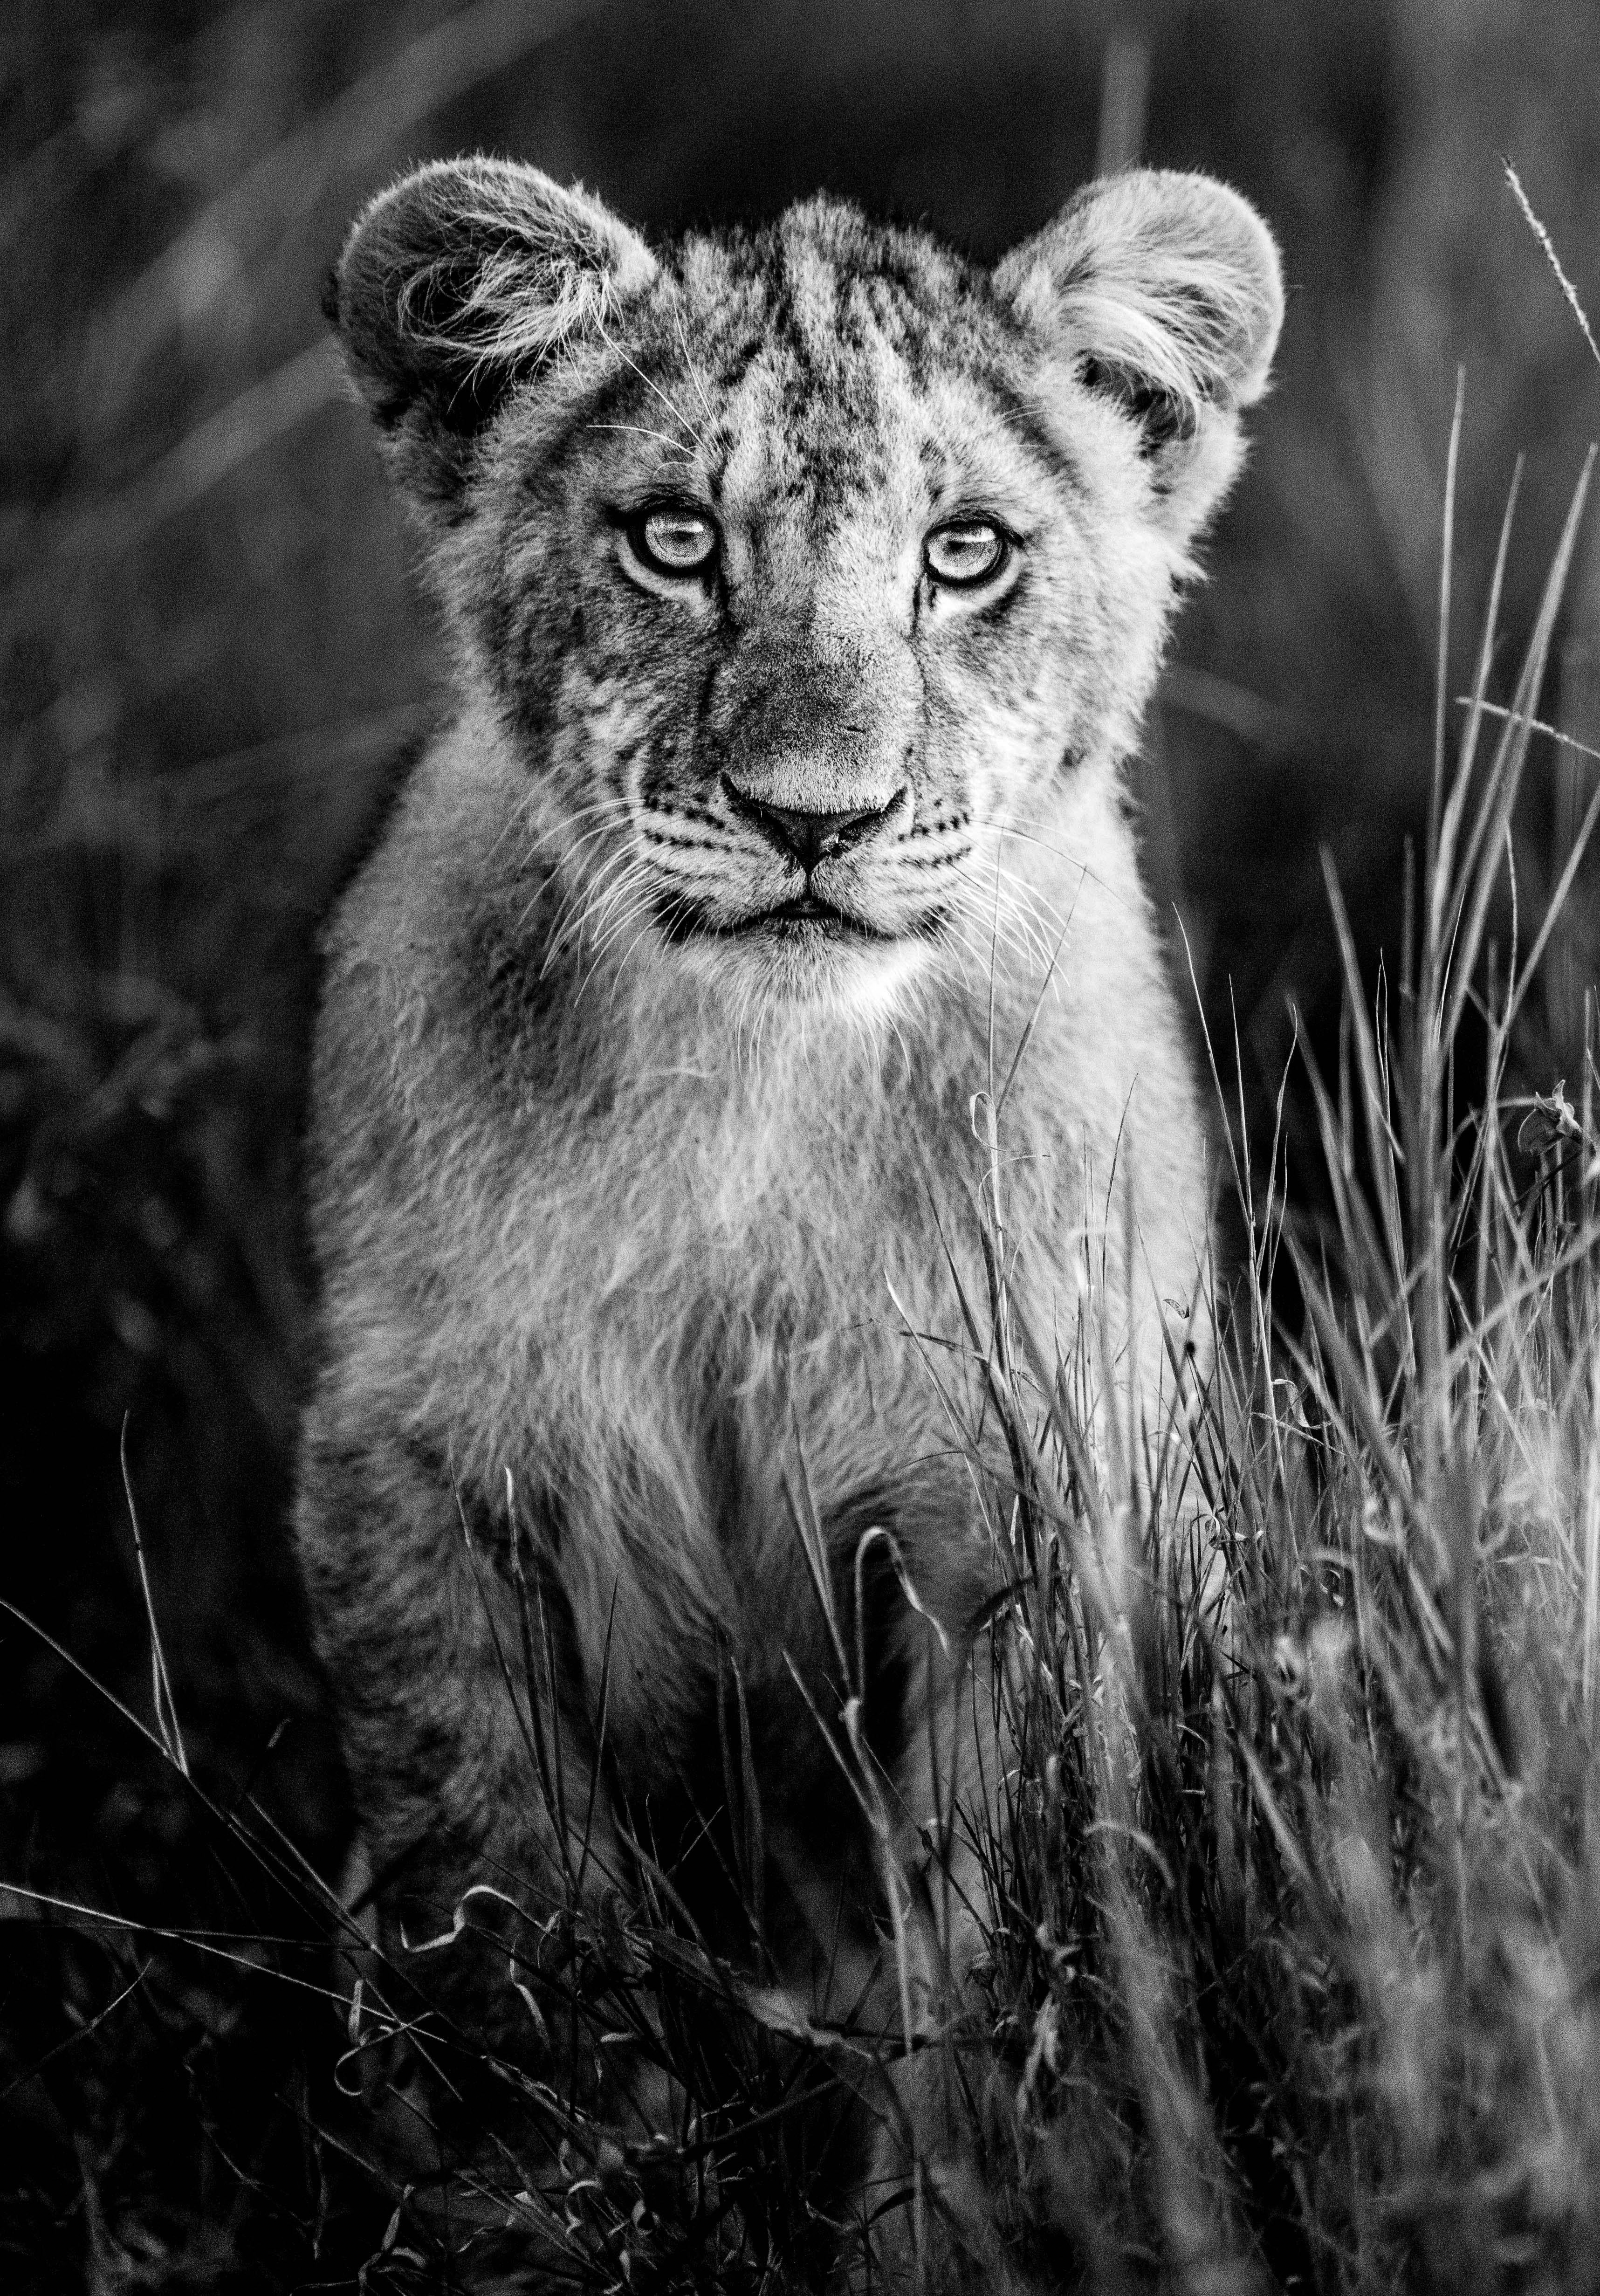 "Many lion populations across Africa are declining at an alarming rate, with total extinction possible as early as 2050. It is, therefore, always a pleasure and a relief to witness future generations. Kenya has been at the forefront of lion